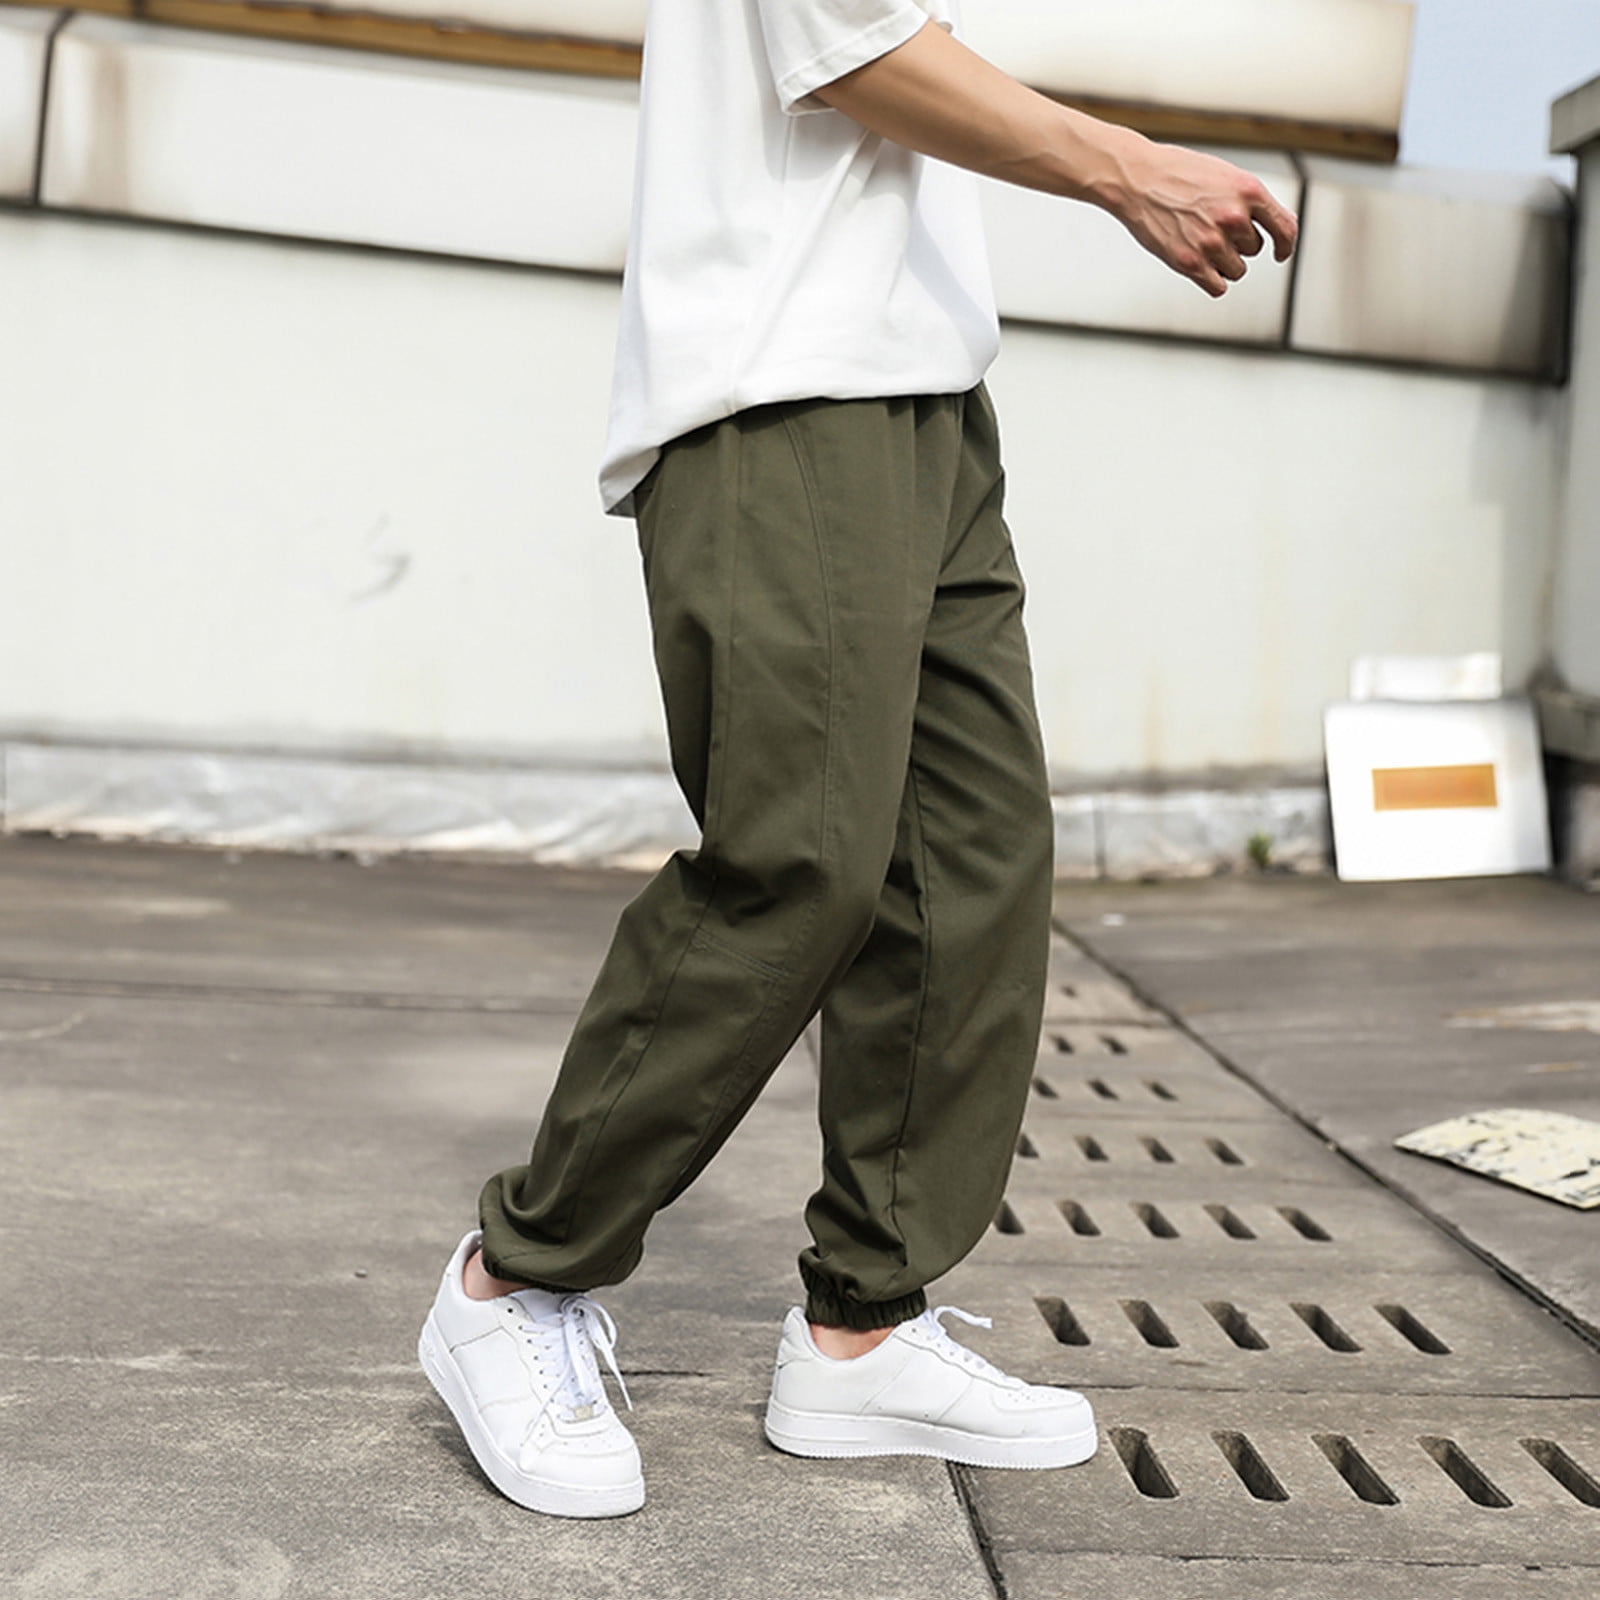 Korean Style Ripped Boys Cargo Pants For Boys Wideleg, Loose Fit, Handsome,  Cool Fashion Design 2023 Summer Collection Style #230905 From Quan07,  $15.28 | DHgate.Com